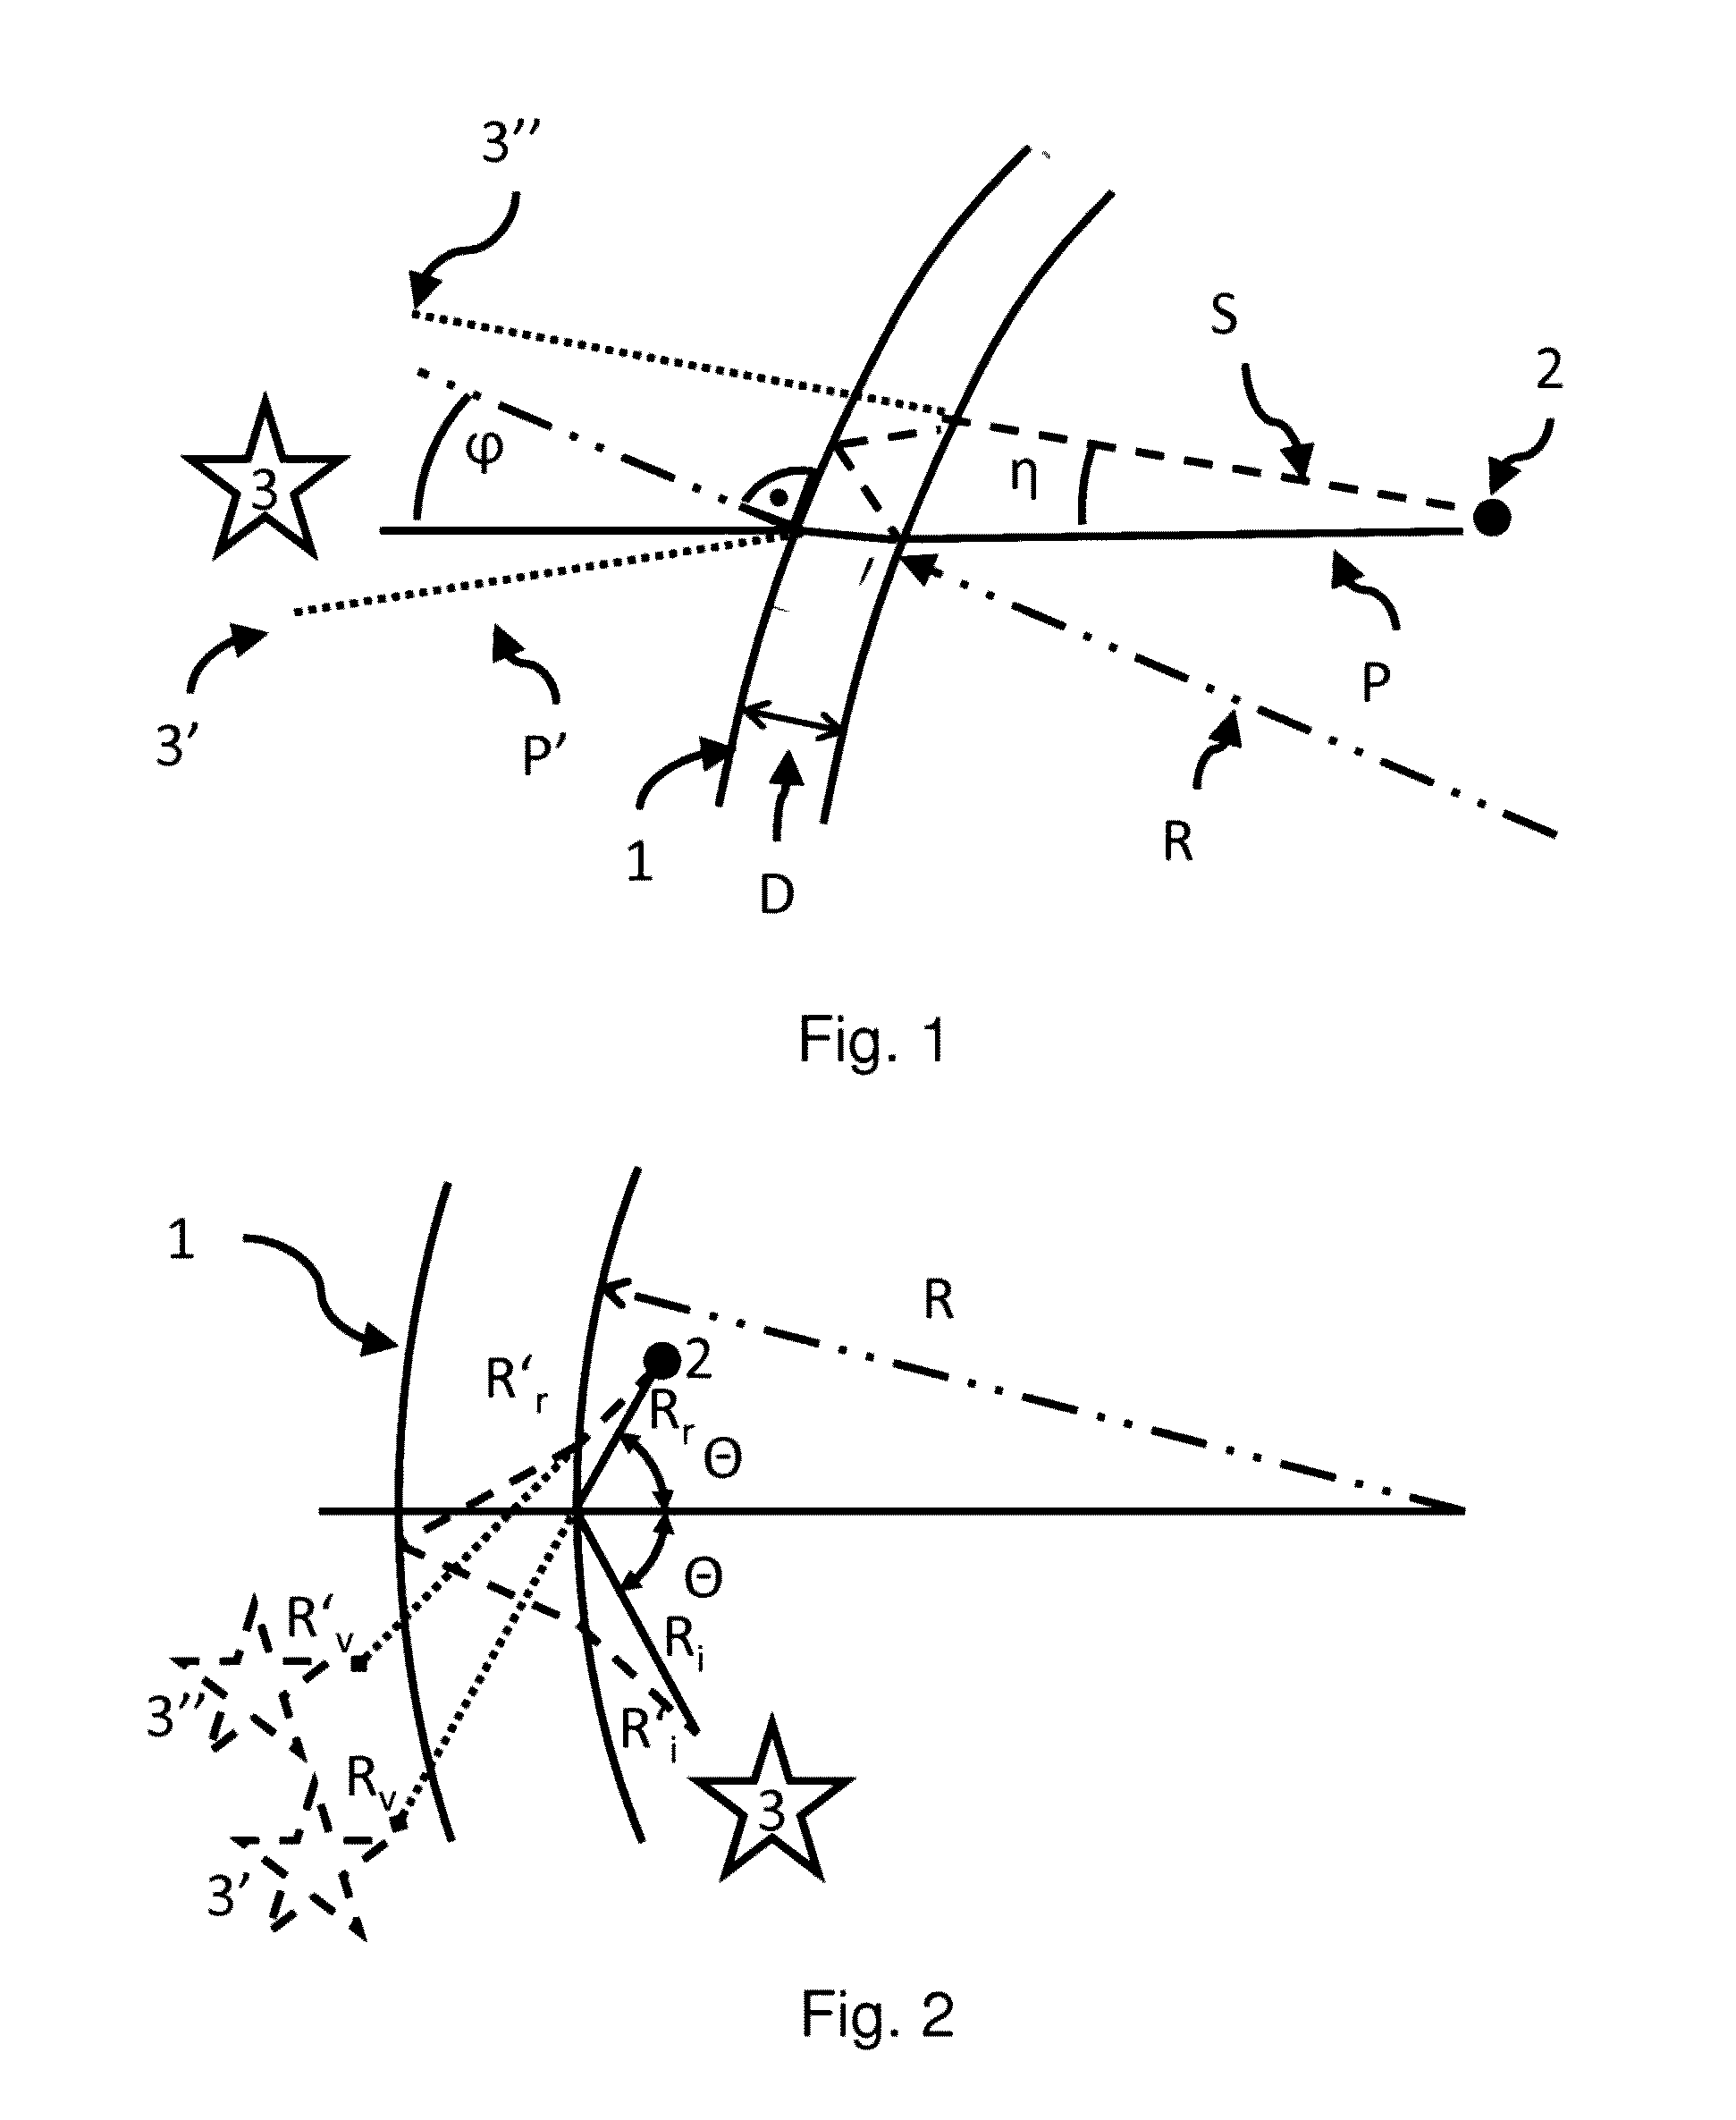 Thermoplastic film for a laminated-glass pane having a non-linear continuous wedge insert in the vertical direction in some sections